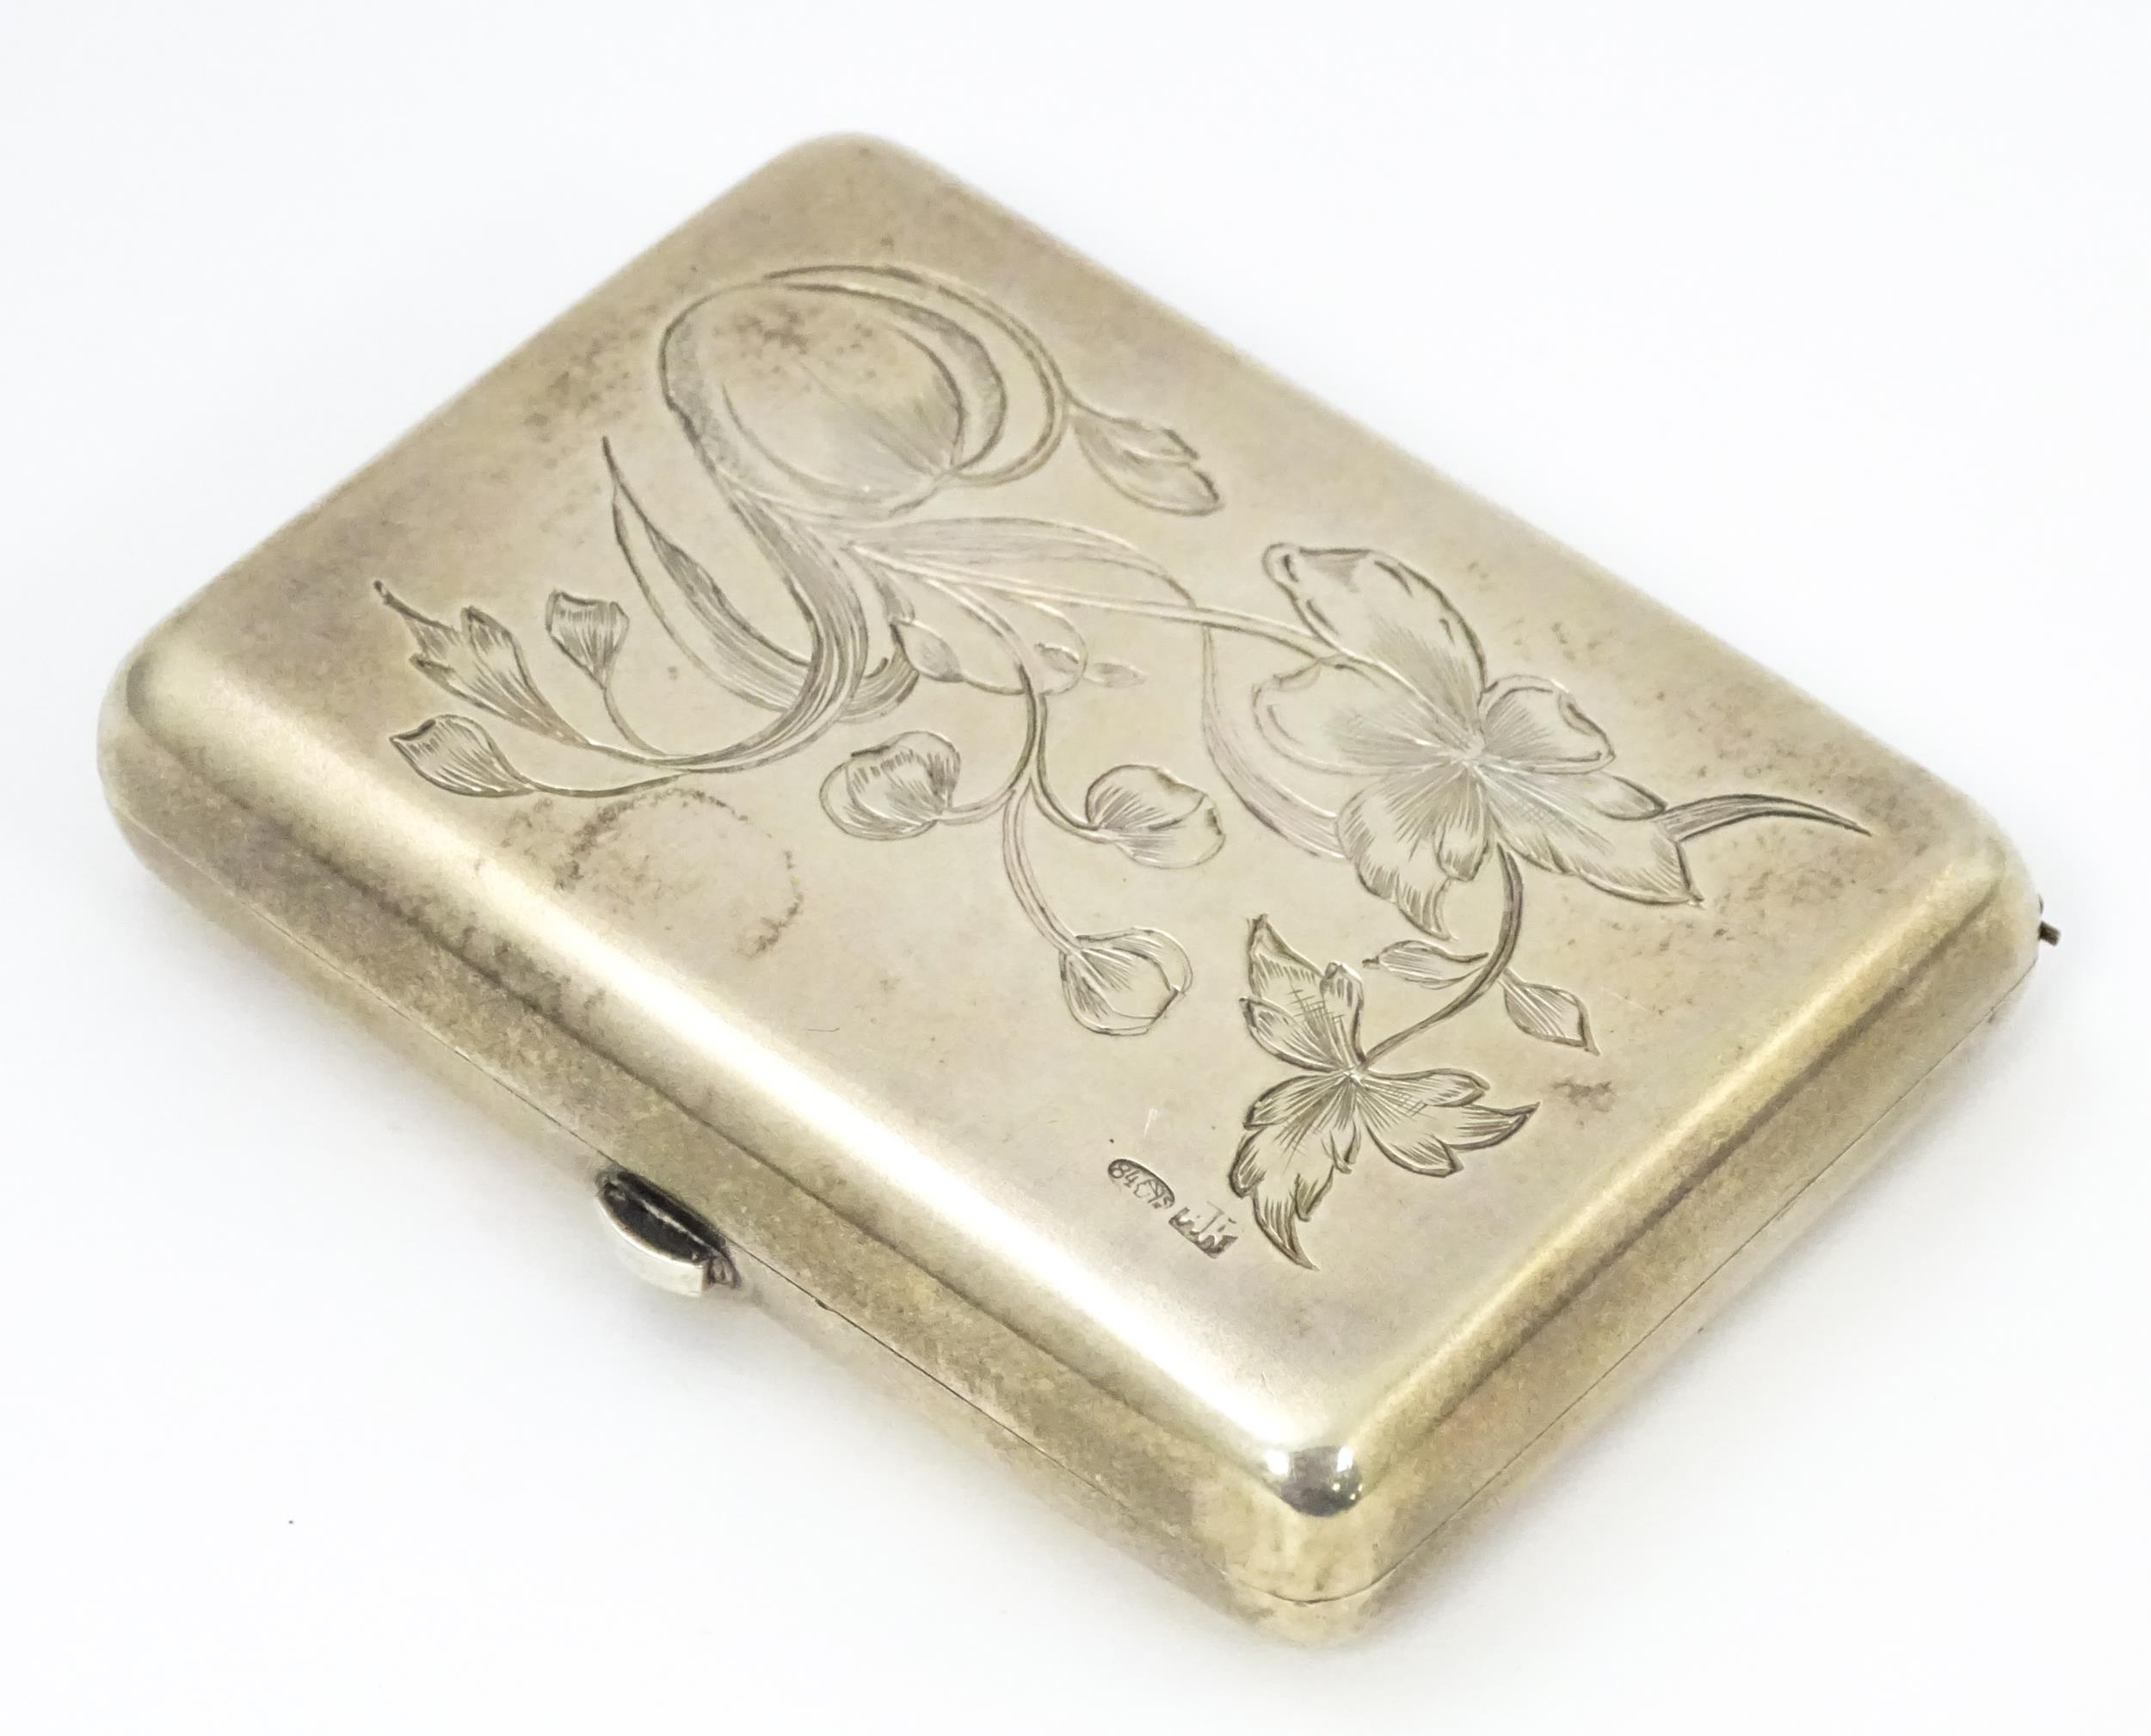 A late 19th / early 20thC Russian silver cigarette / snuff box with engraved floral decoration.